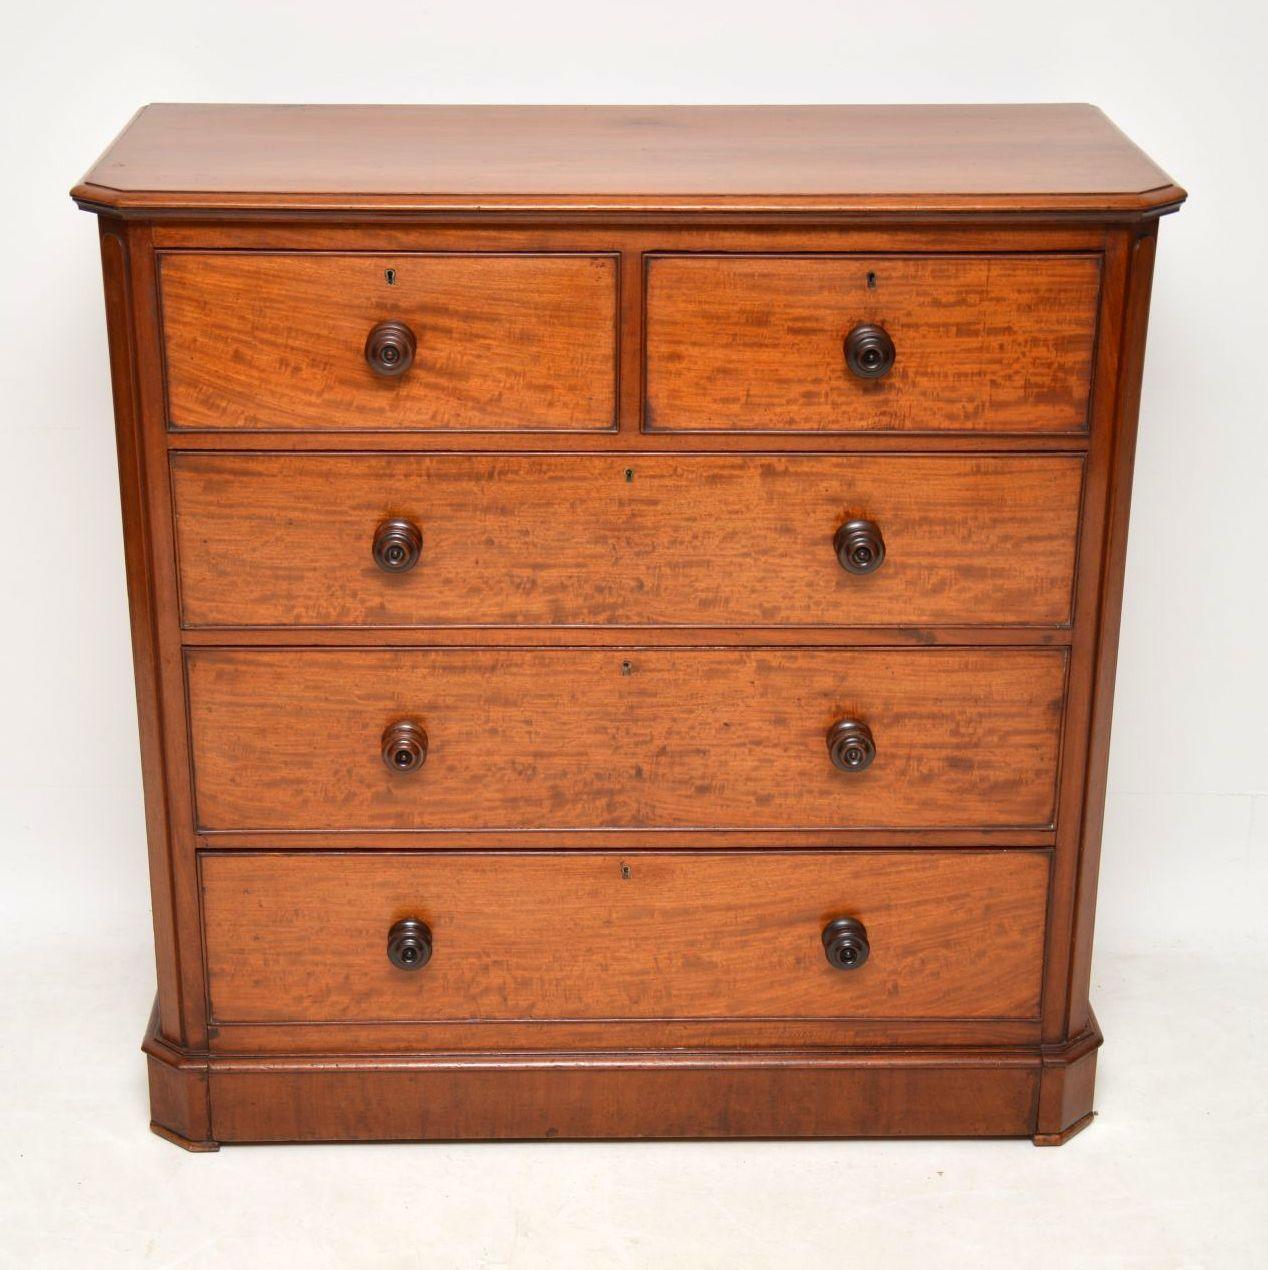 Large antique William IV mahogany chest of drawers. This is a fabulous quality and great looking large antique chest of drawers. It’s William IV dating to circa 1830s-4019s period in mahogany with a solid mahogany top, canted corners and a plinth